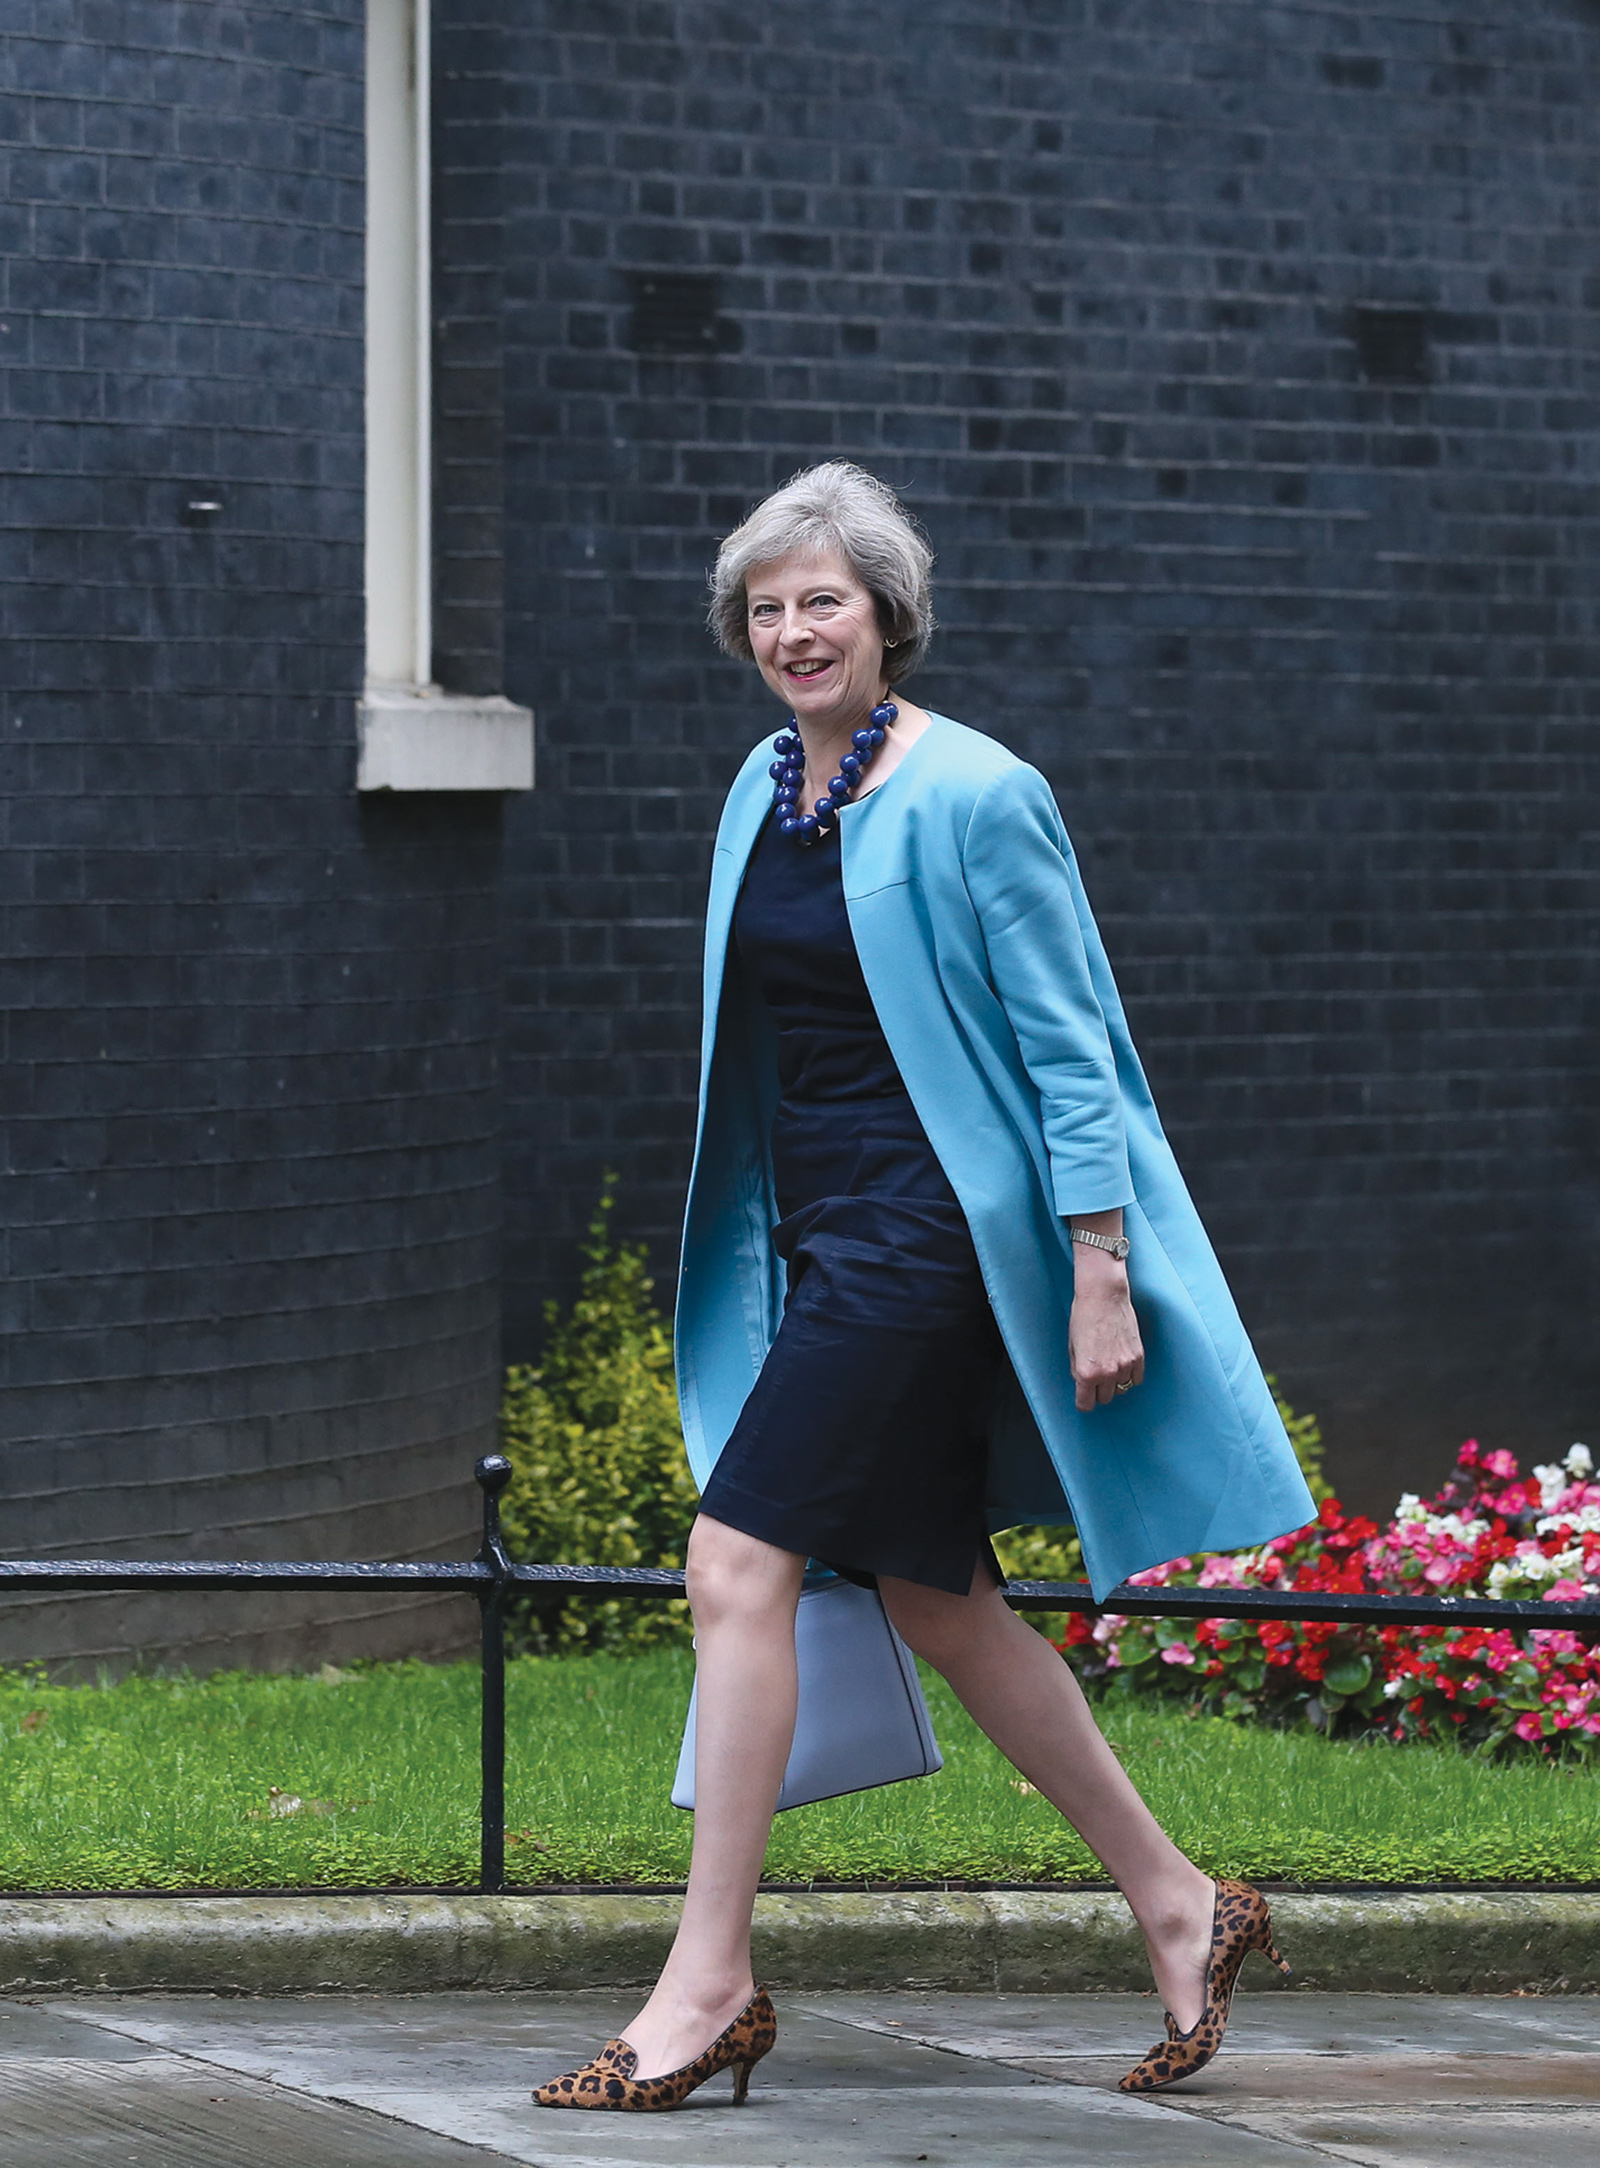 Theresa May, Britain’s new prime minister, London, July 2016